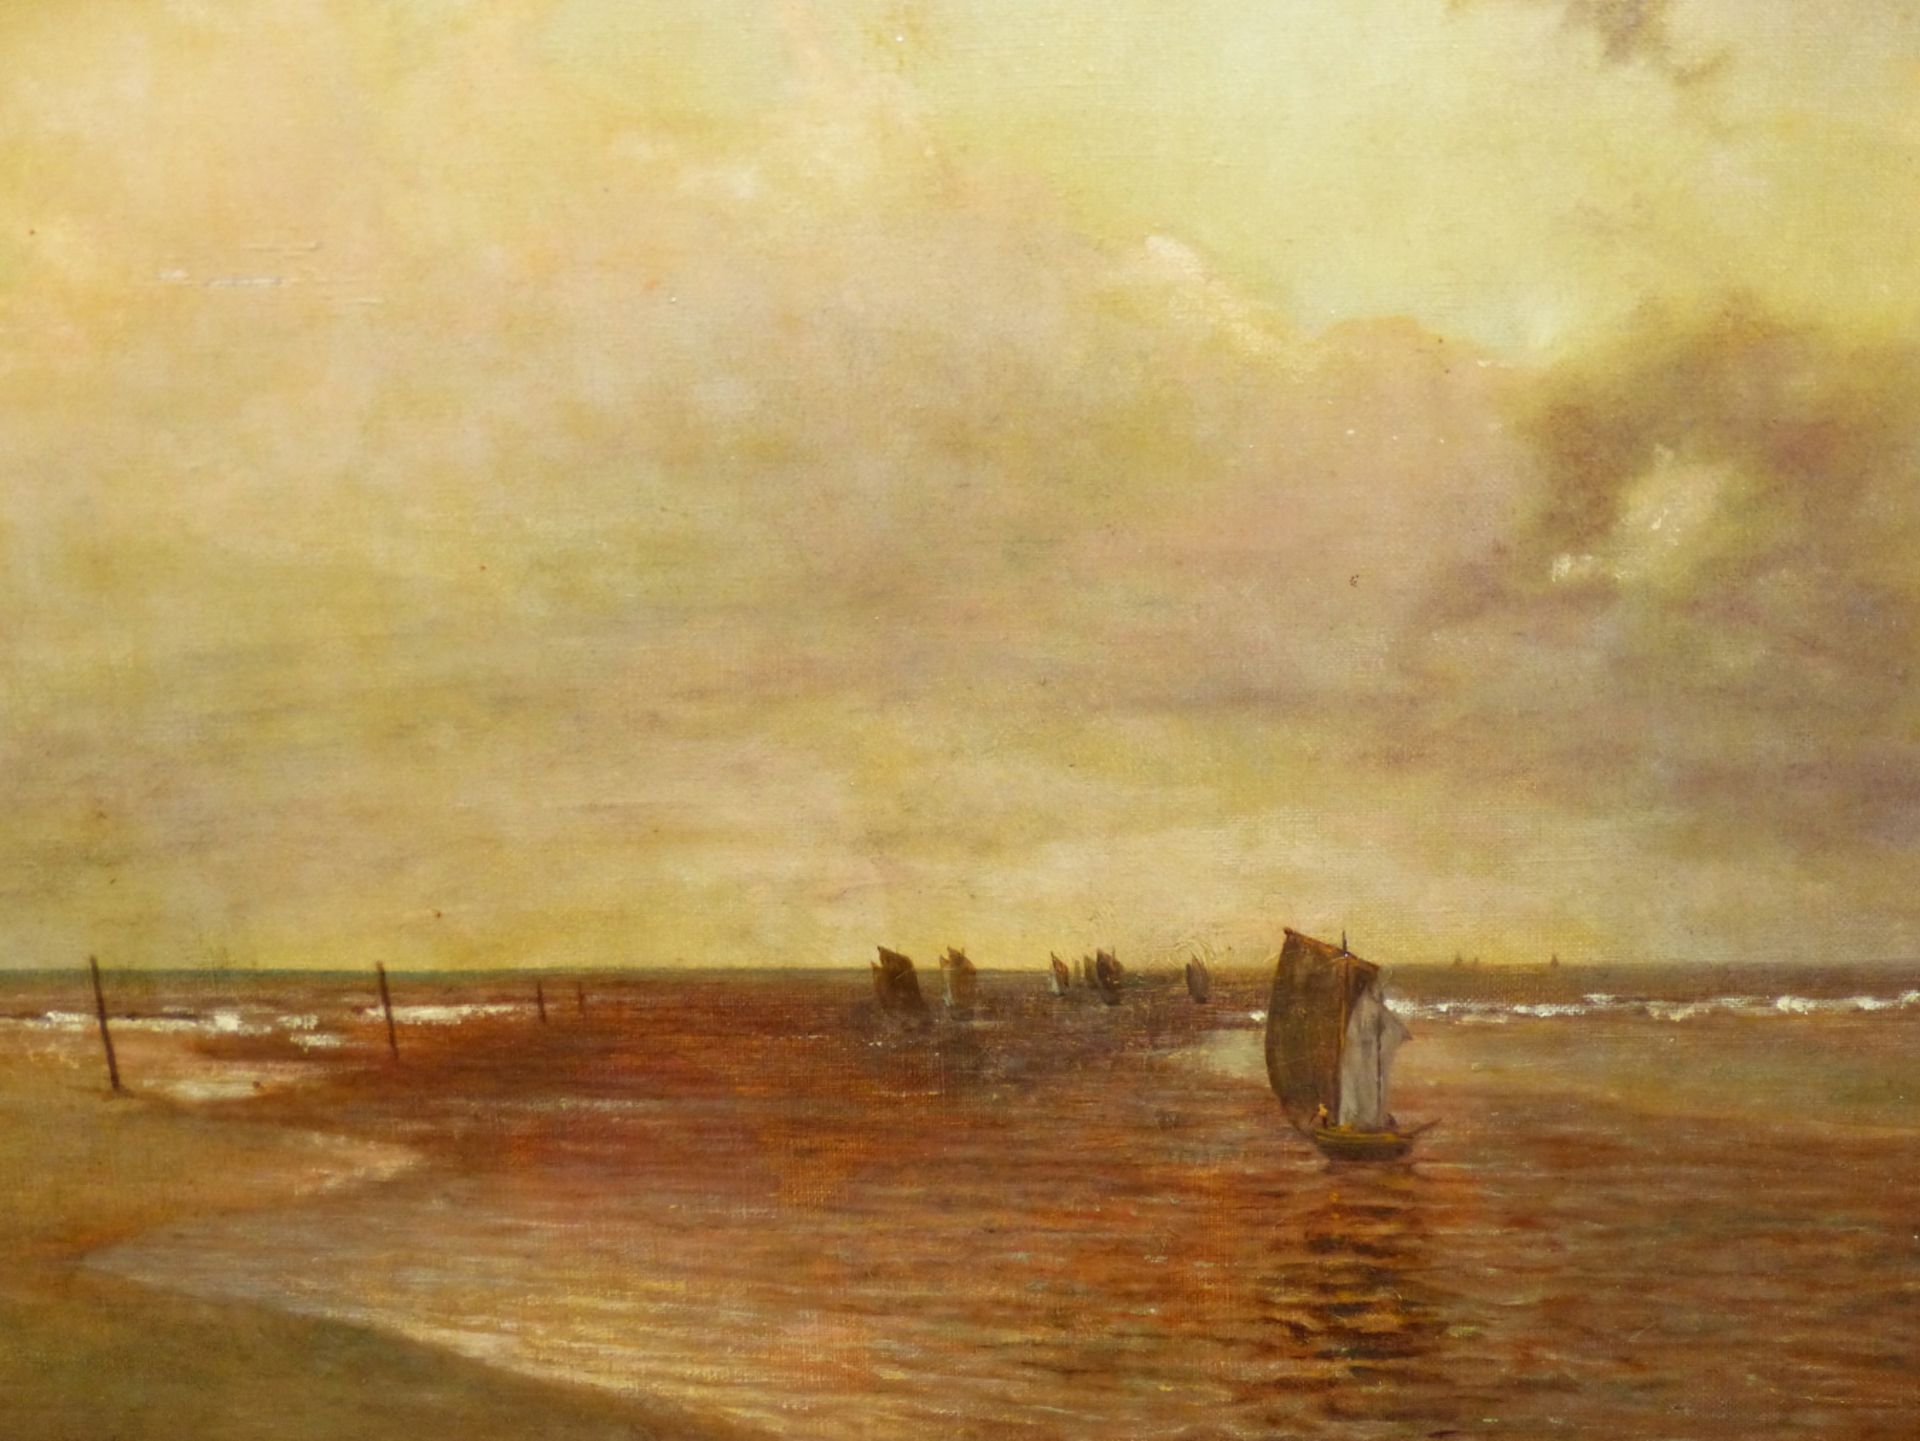 BRITISH SCHOOL (EARLY 20TH CENTURY), BOATS OFF A SHORELINE, SIGNED WITH INITIALS NS AND DATED